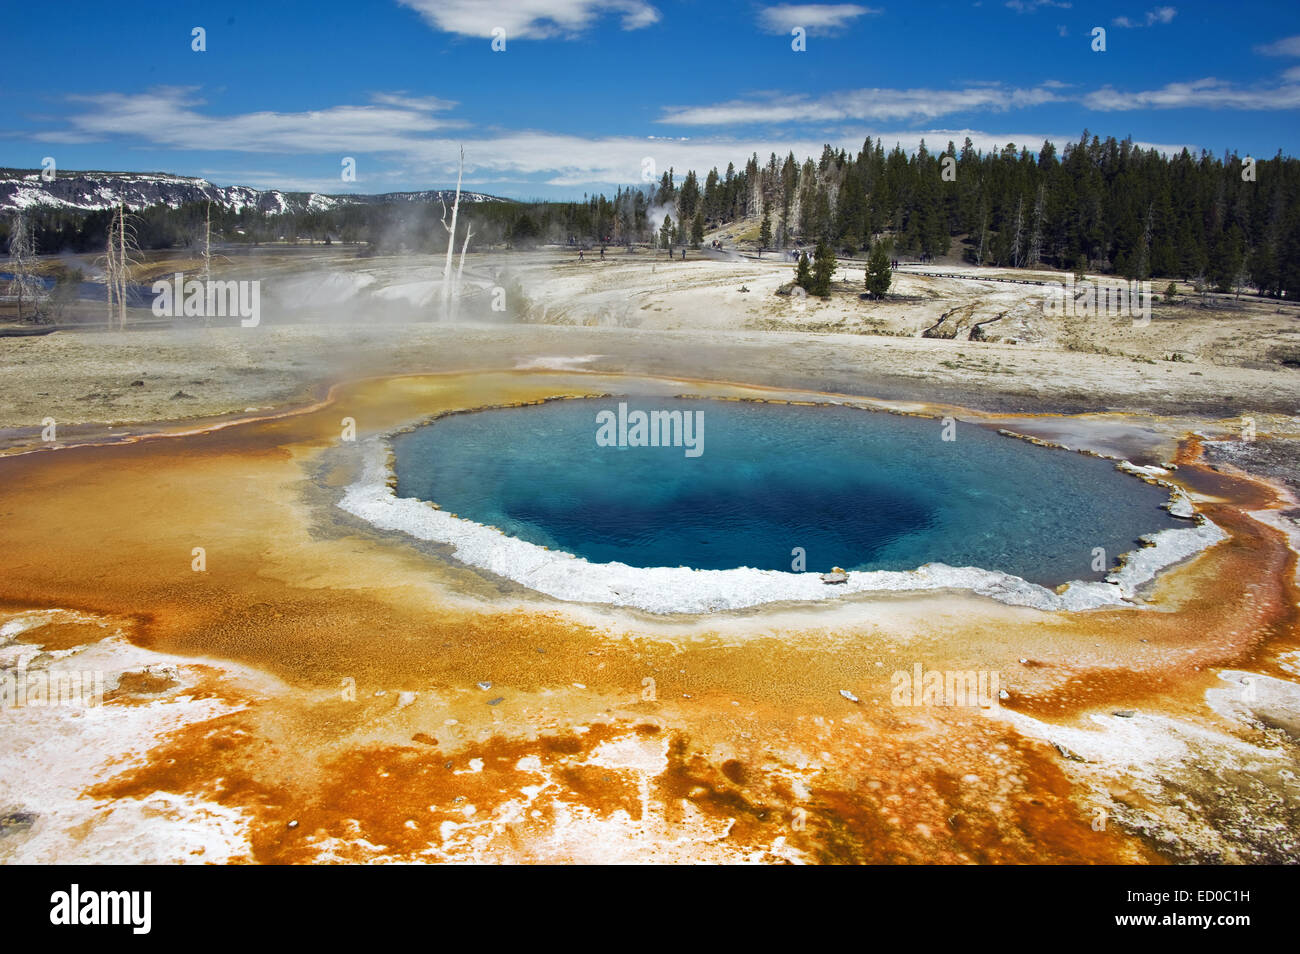 USA, Wyoming, Yellowstone National Park, Opal pool in Midway Geyser Basin Stock Photo